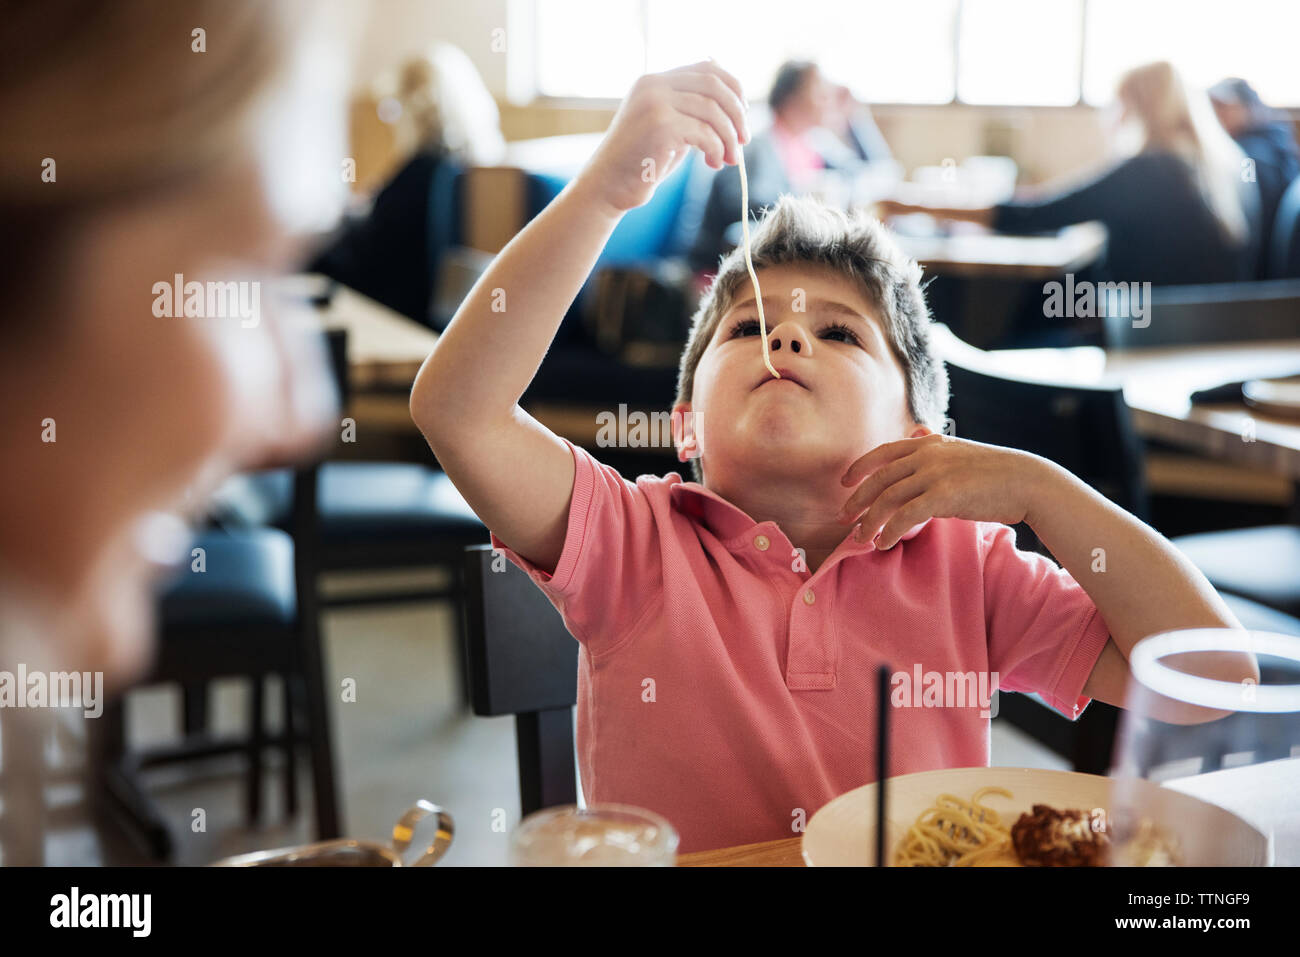 Cute boy eating noodle at restaurant table Stock Photo